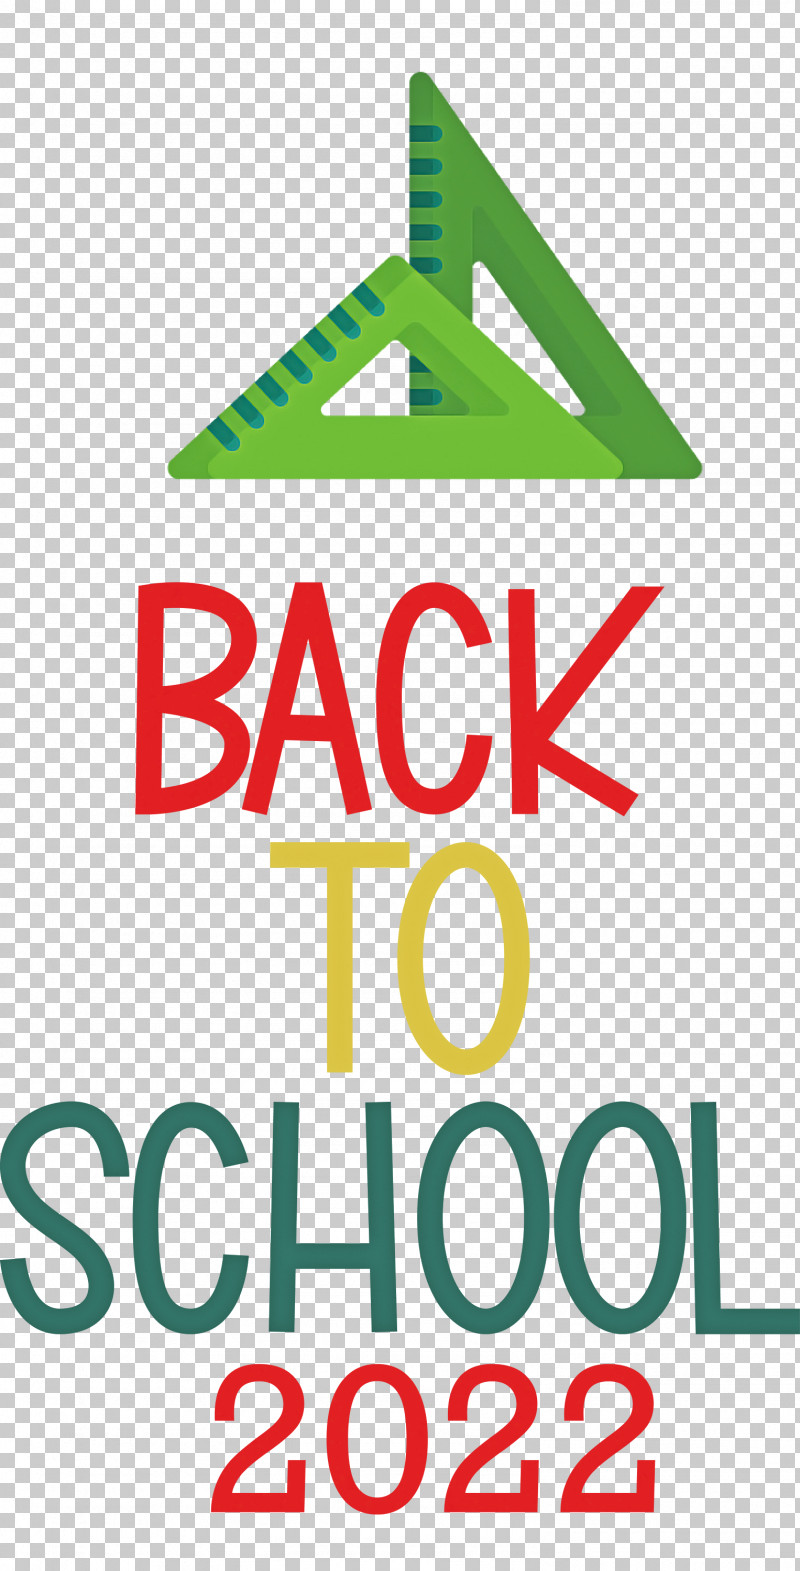 Back To School 2022 Education PNG, Clipart, Education, Geometry, Green, Line, Logo Free PNG Download